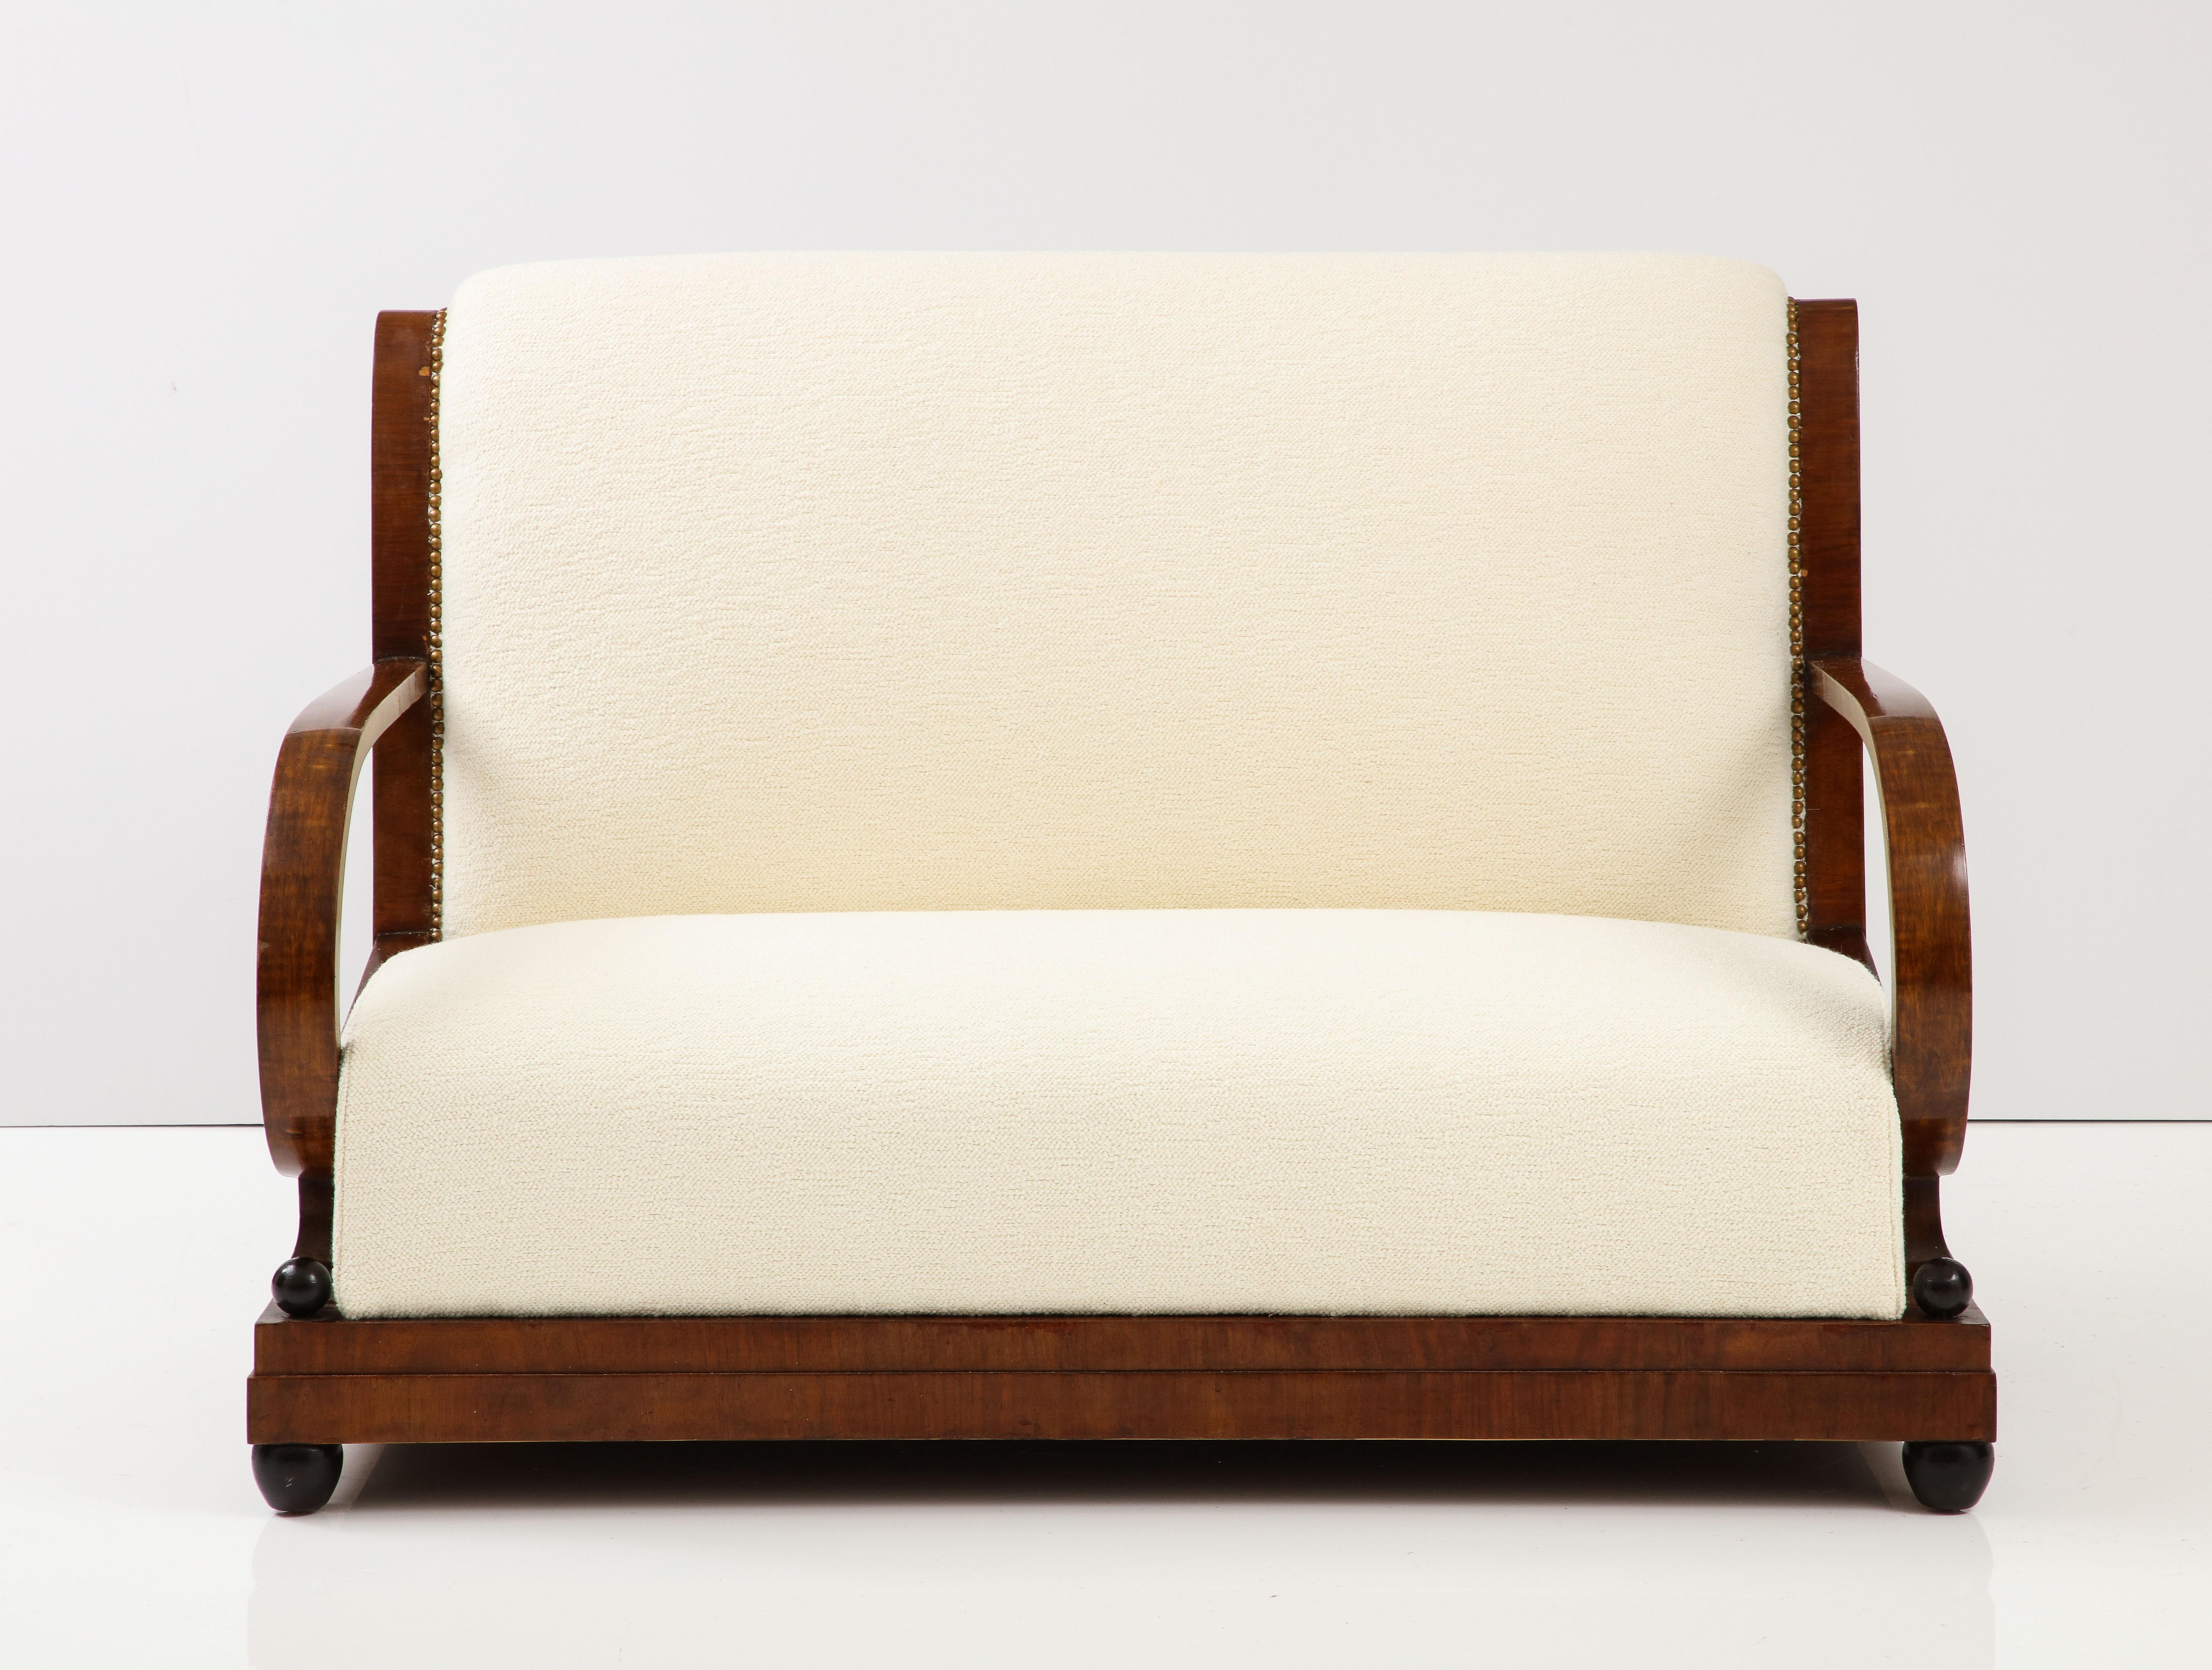 An Italian 1920's settee from the early Art Deco period of Northern Italy. The rich walnut is finely carved and highlights the woods natural beauty, the settee back rest is gracefully curved extending out to accentuate the curvature of the sloping